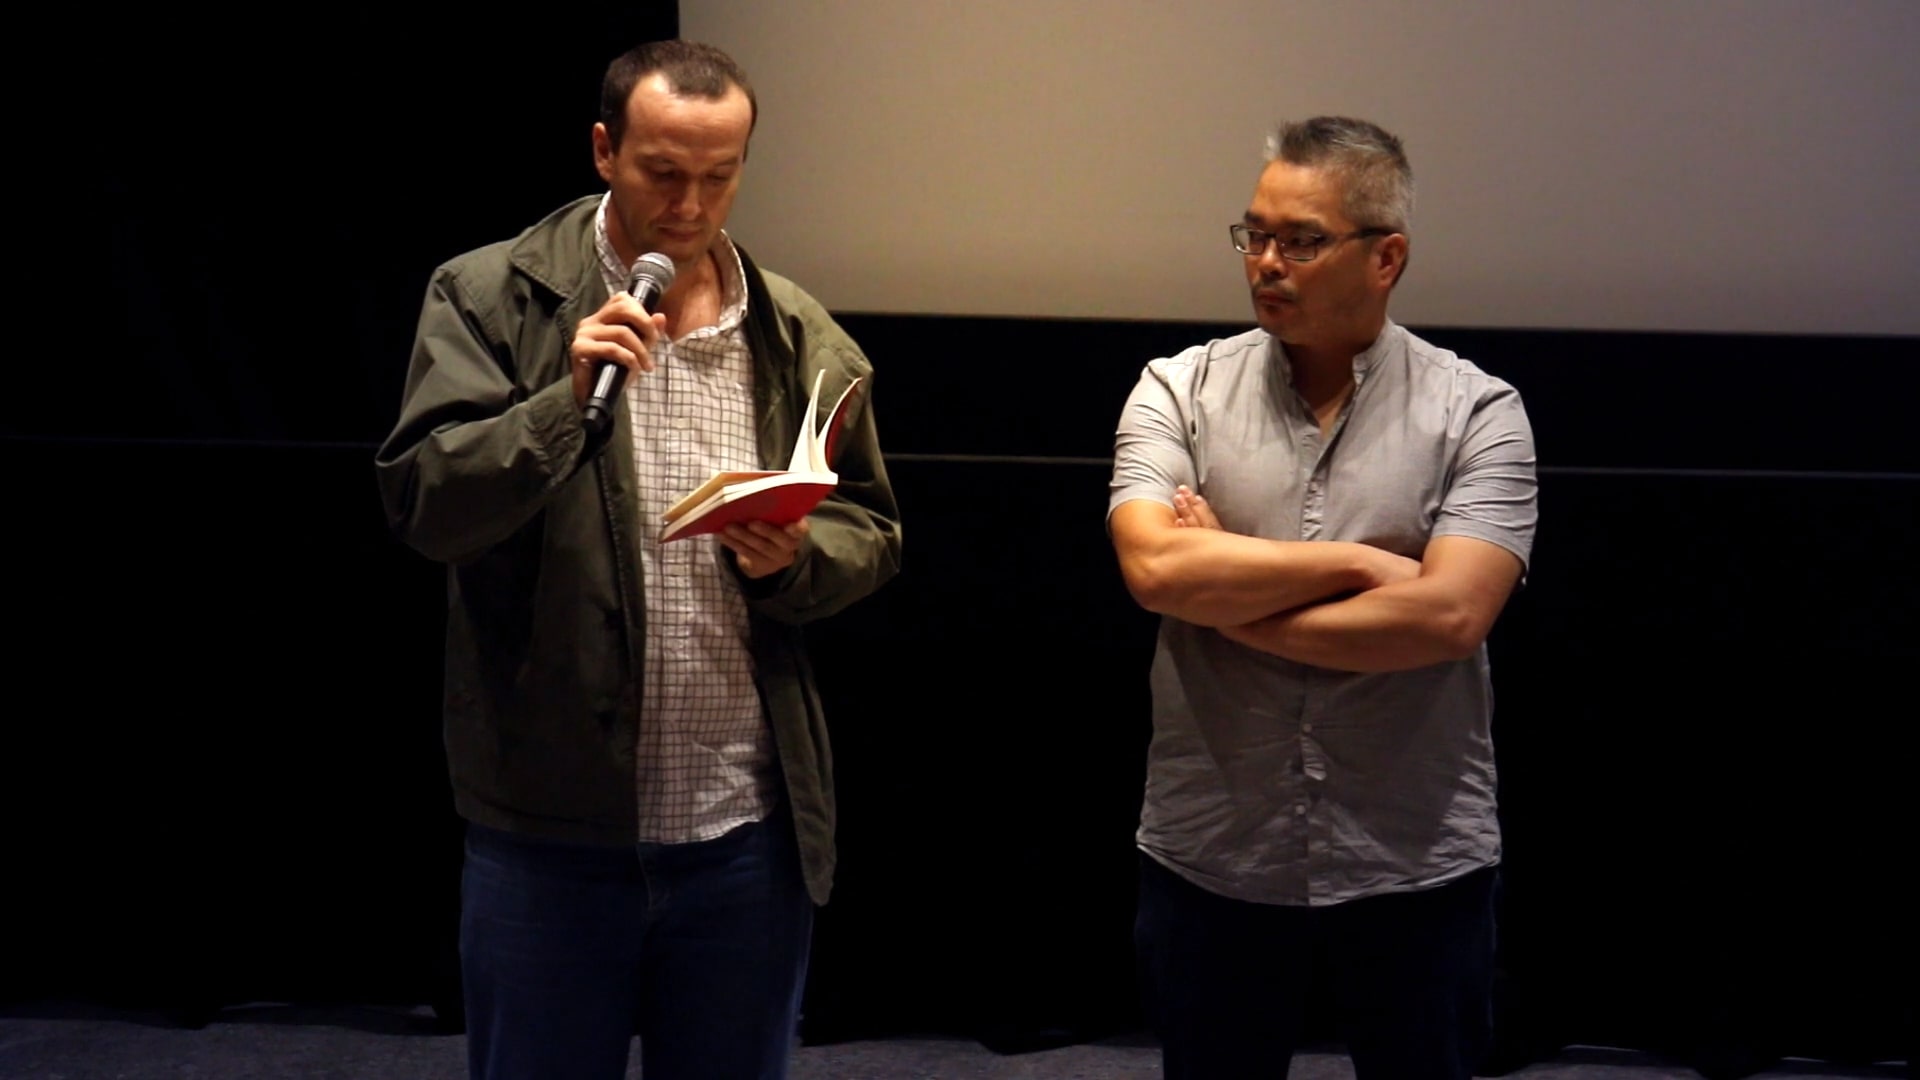 Still from Q&A with Migrant Justice Activists Joey Calugay and Manuel Salamanca - THE HAND THAT FEEDS